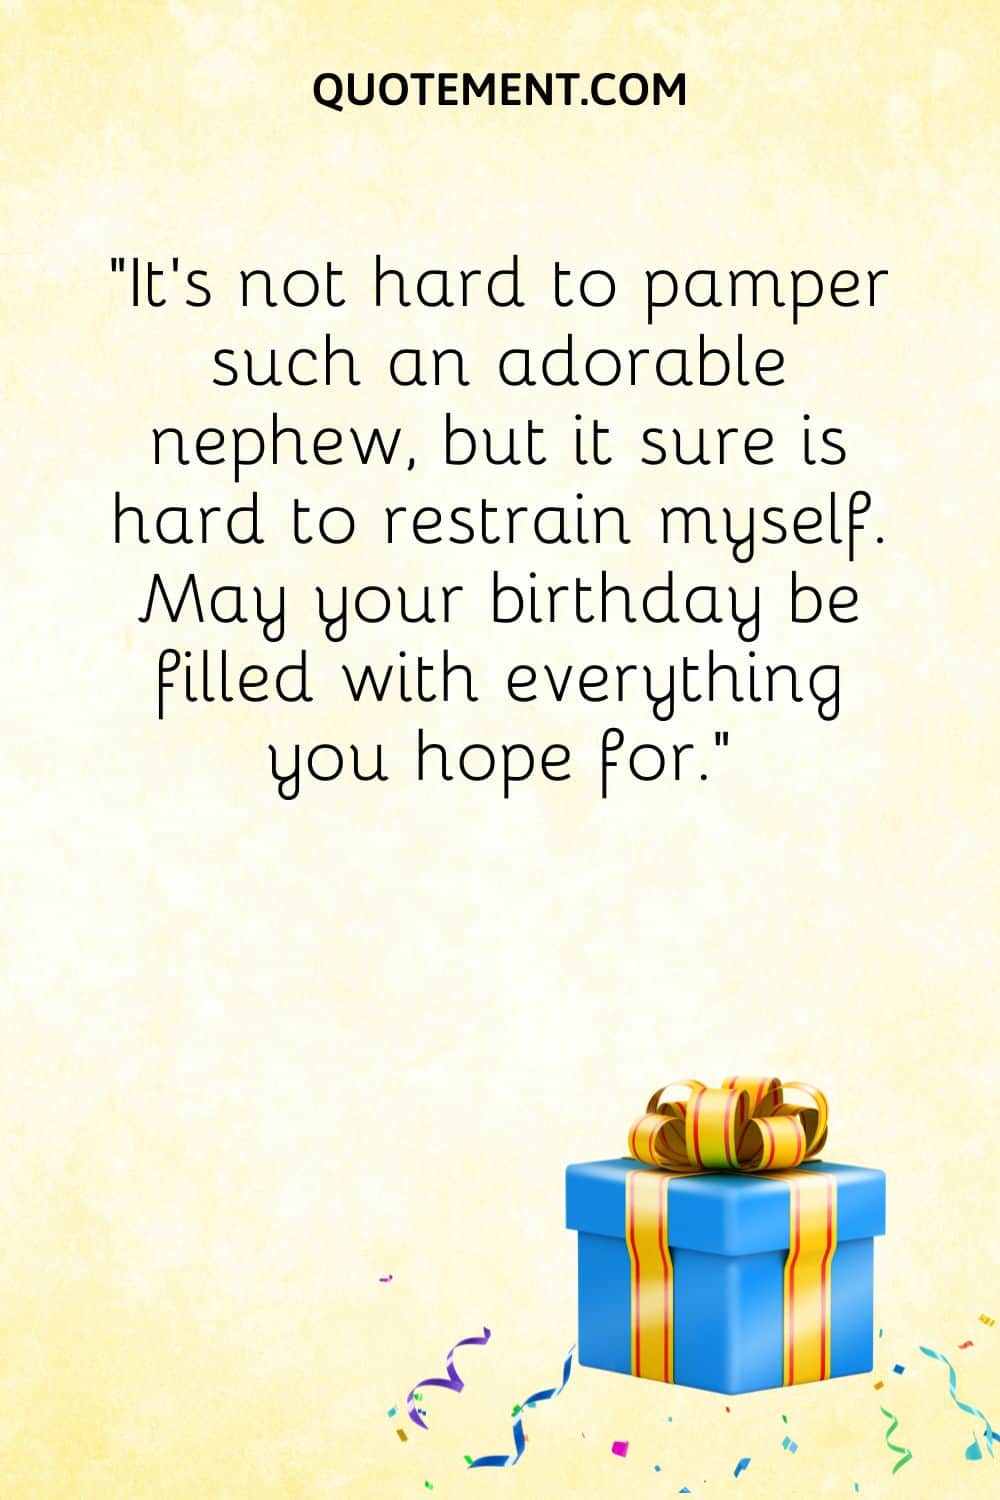 “It’s not hard to pamper such an adorable nephew, but it sure is hard to restrain myself. May your birthday be filled with everything you hope for.”